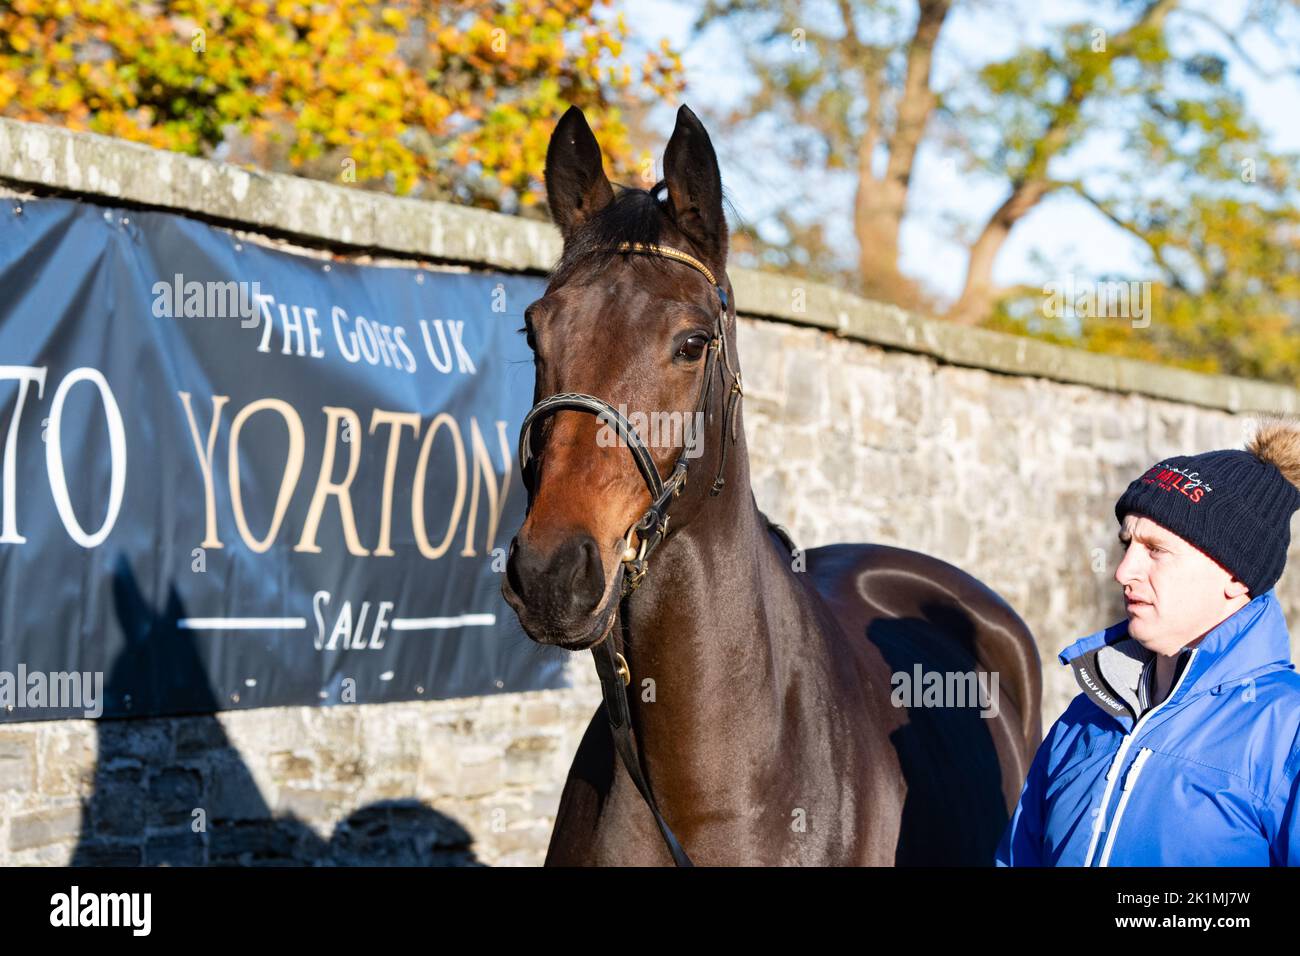 Saint Davy, who sold for £270,000 at the 2021 Goffs December P2P Sale at Yorton Stud, Welshpool, Wales after a maiden 4-y-o P2P win at Quakerstown. Stock Photo